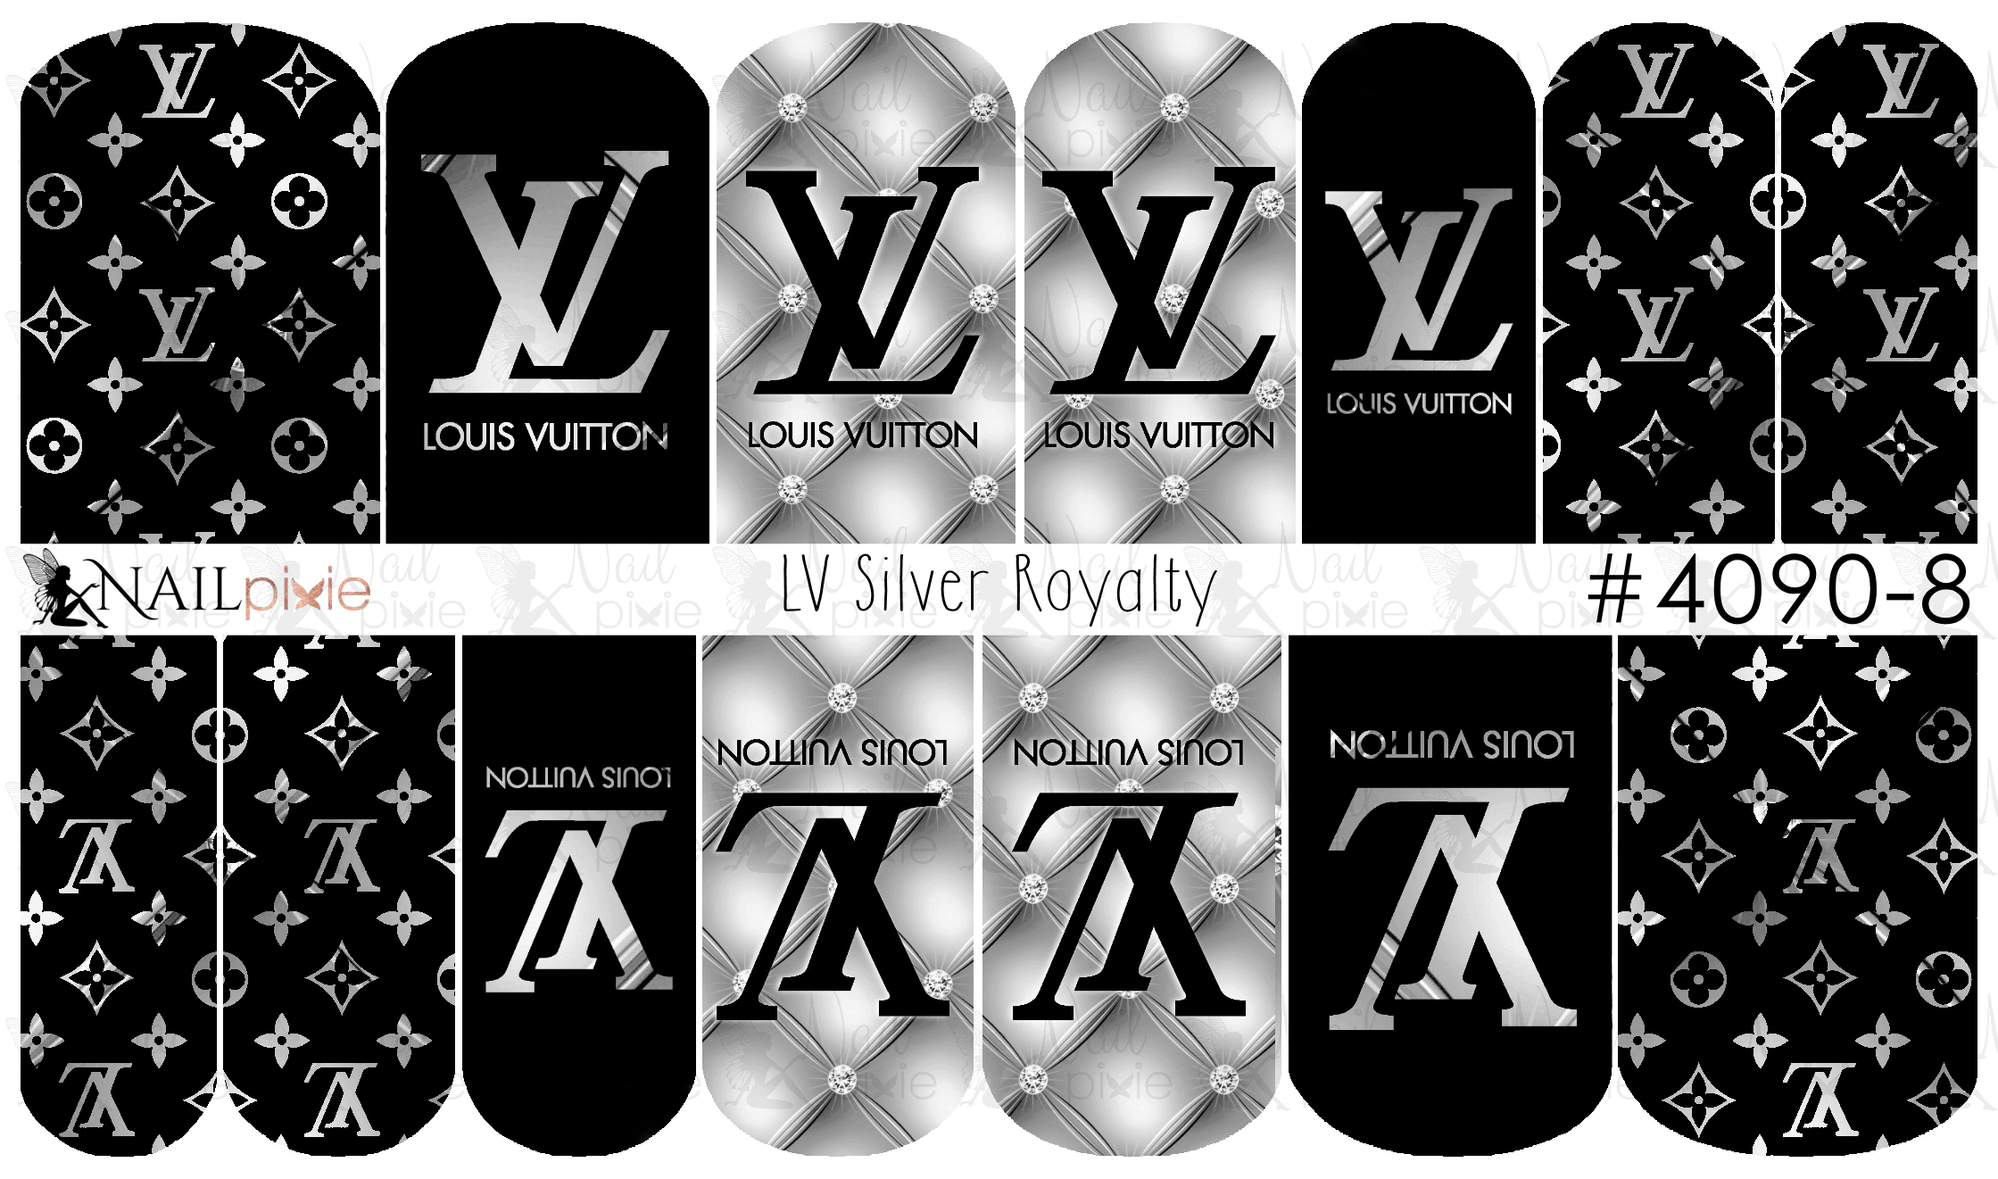 Louis Vuitton Black and White Nail Decals - Largest Selection of Waterslide Nail  Decals / Nail Art in South Africa